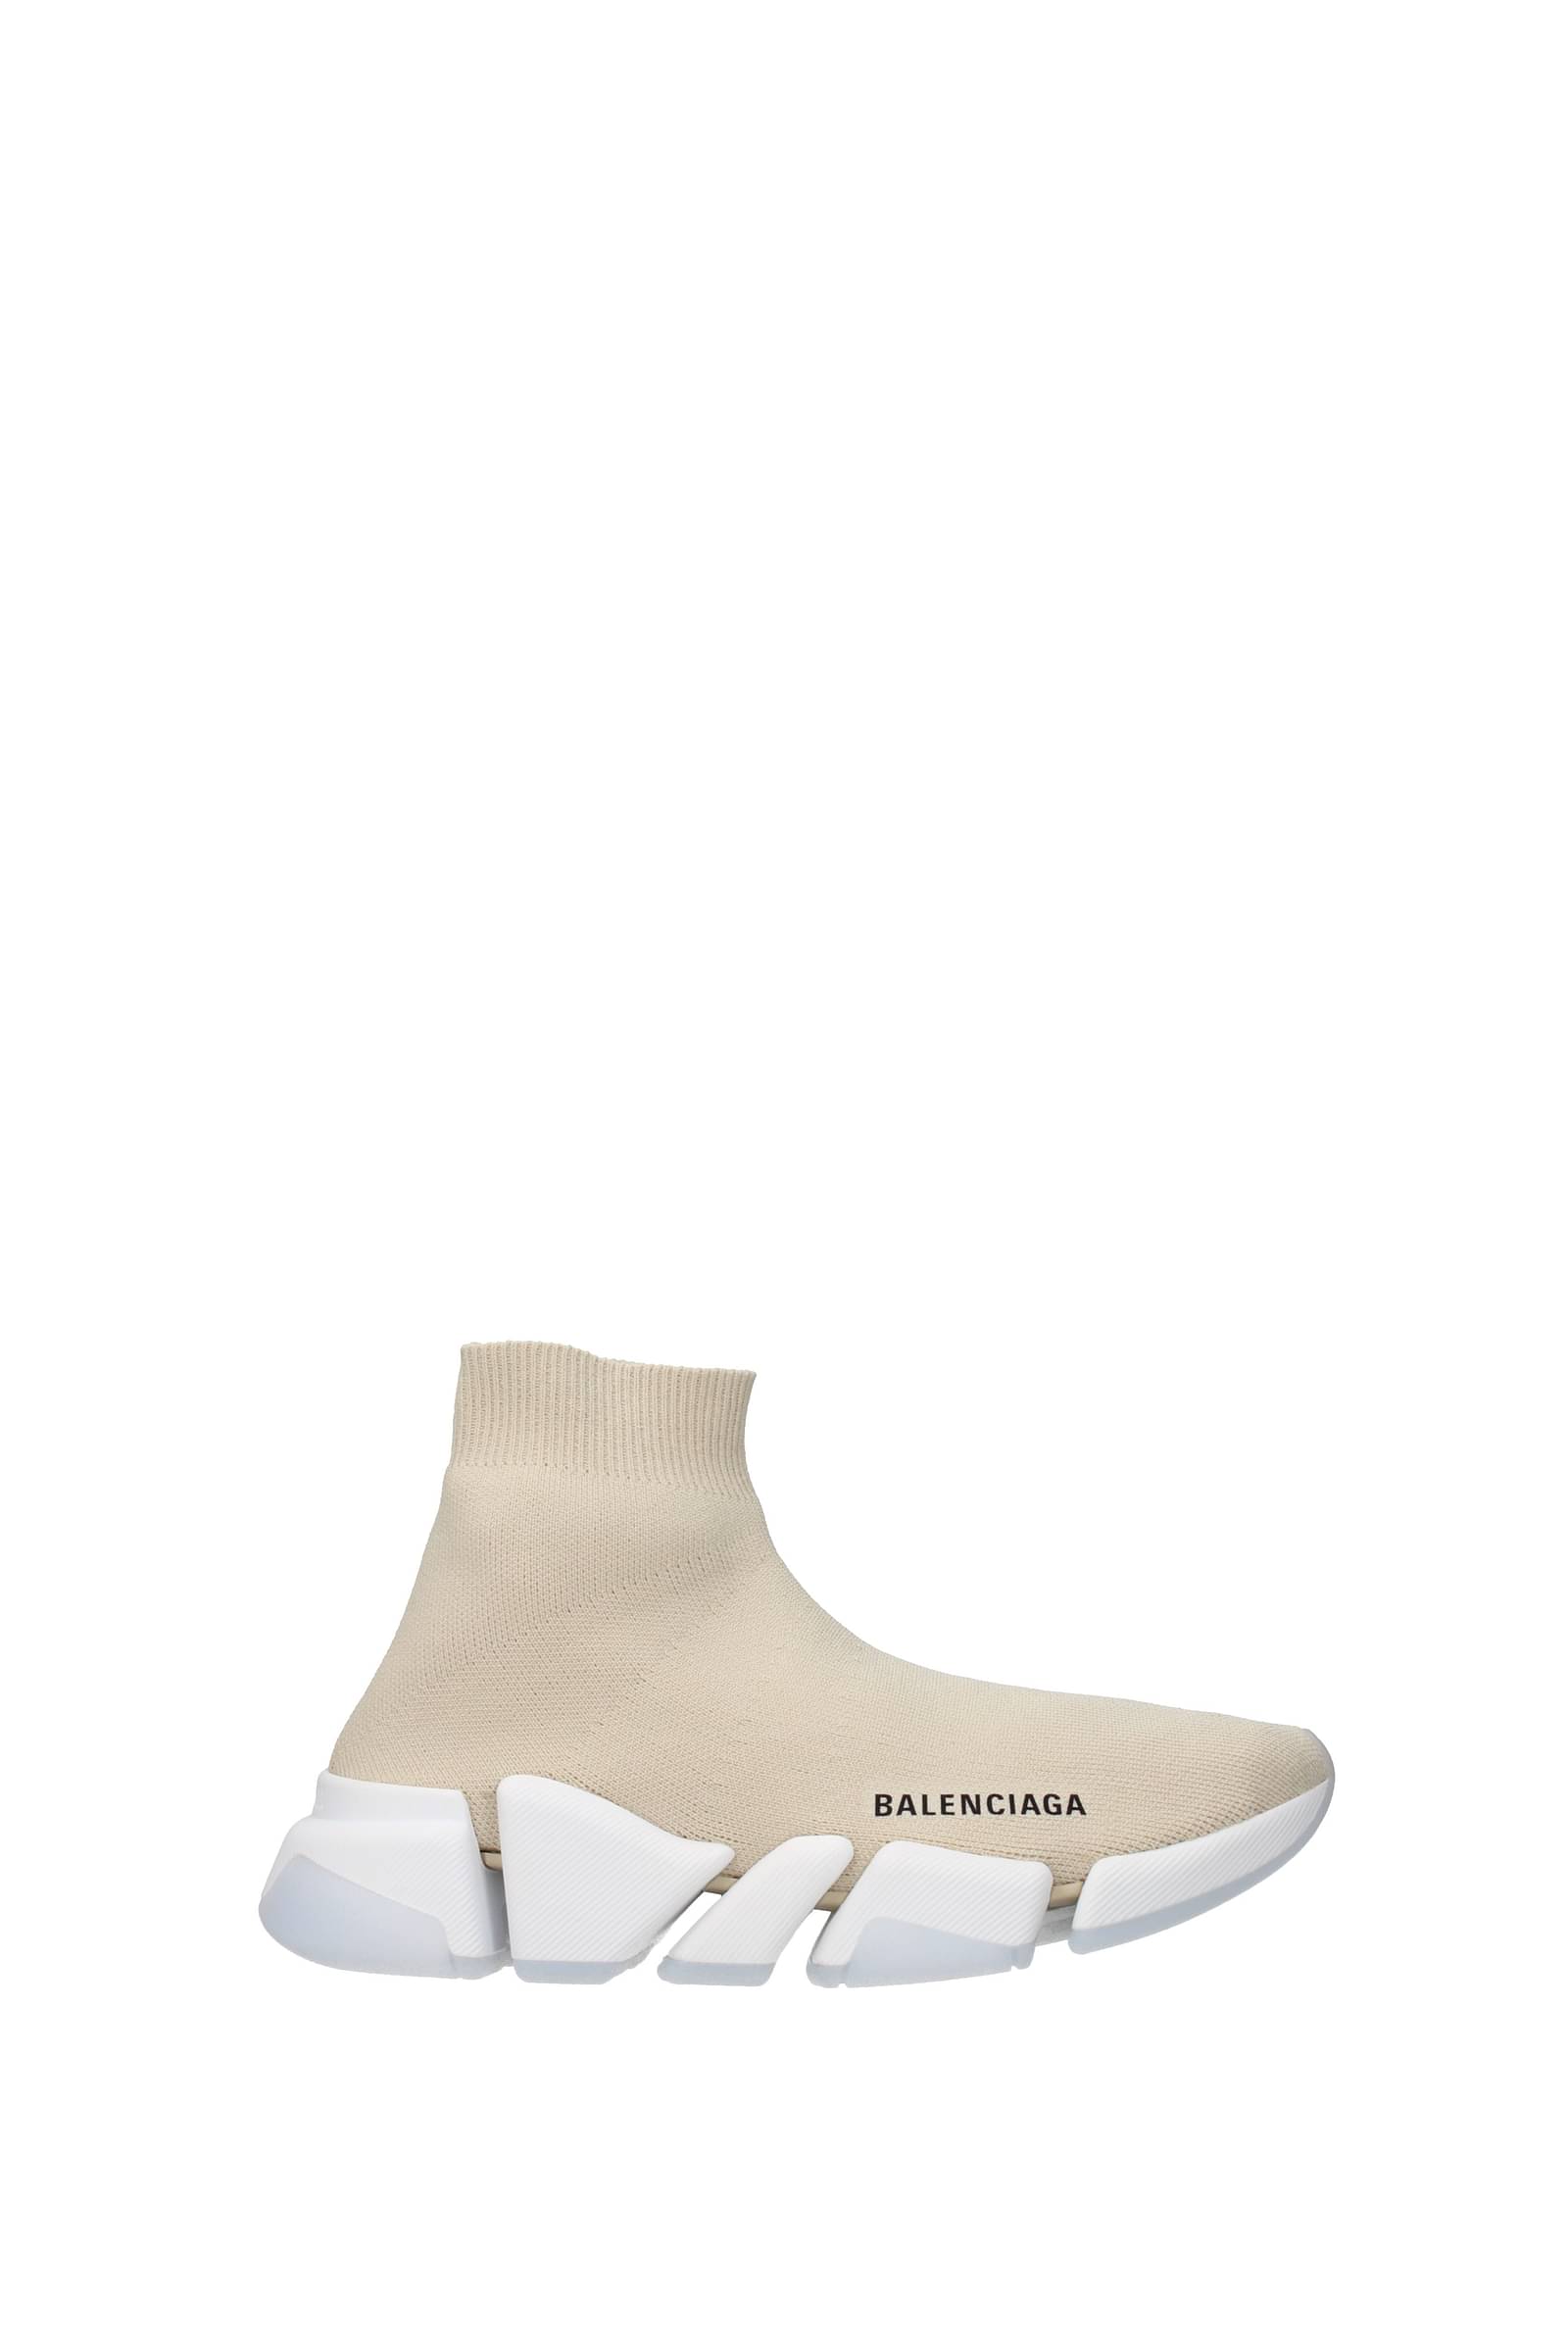 SPEED 20 LT FAUX FUR AND RECYCLED KNIT SNEAKERS  BALENCIAGA for WOMEN   Printempscom